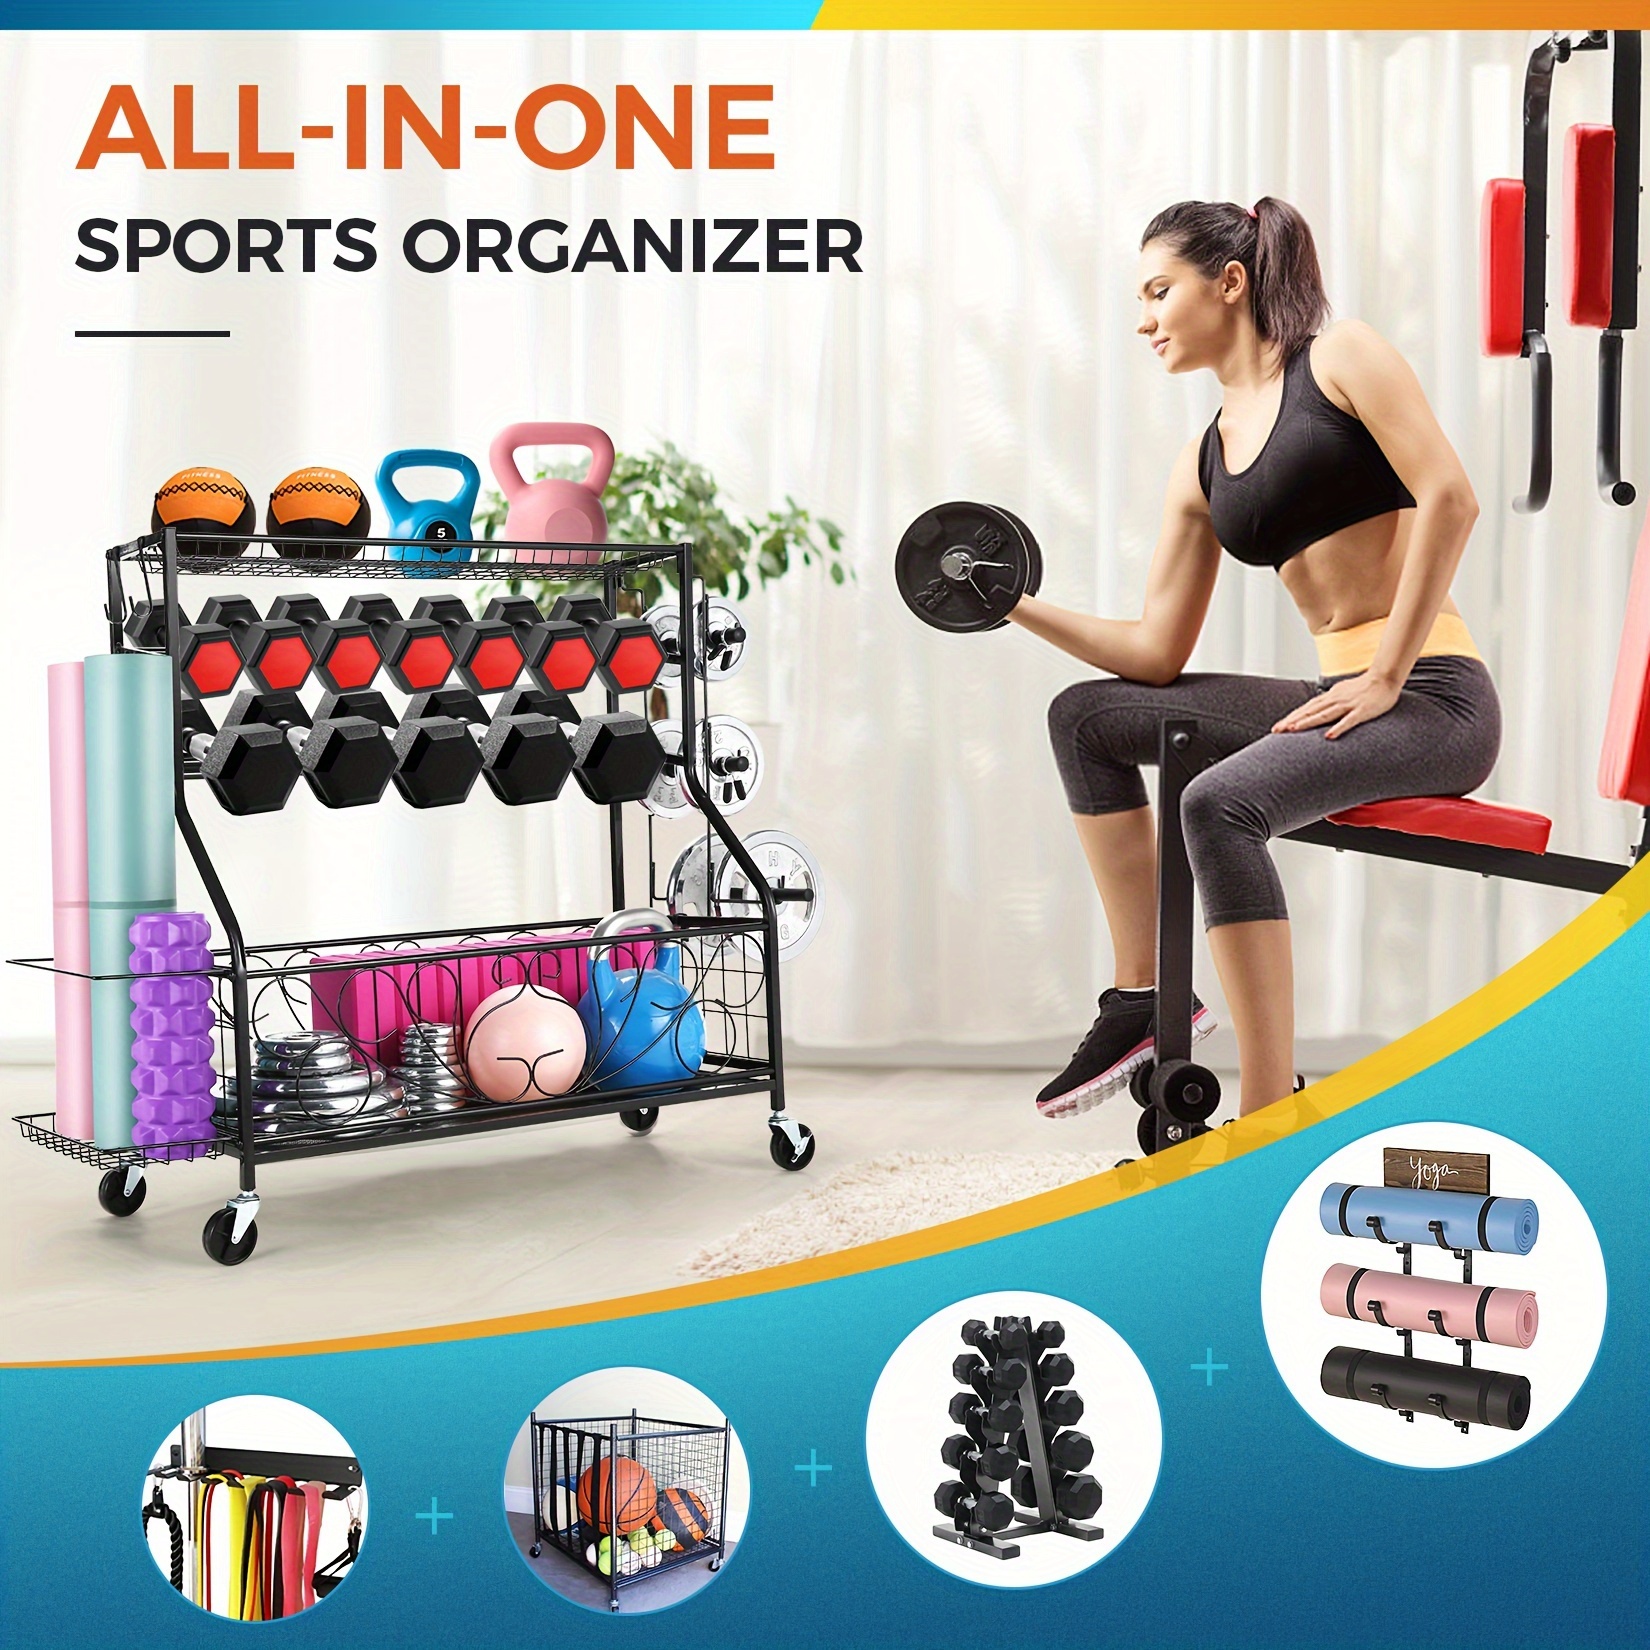 

Sports Equipment Garage Organization And Storage Yoga Mat Holder For Home Gym Weight Rack For Dumbells And Kettlebells Ball Storage Rack With Hooks And Lockable Wheels